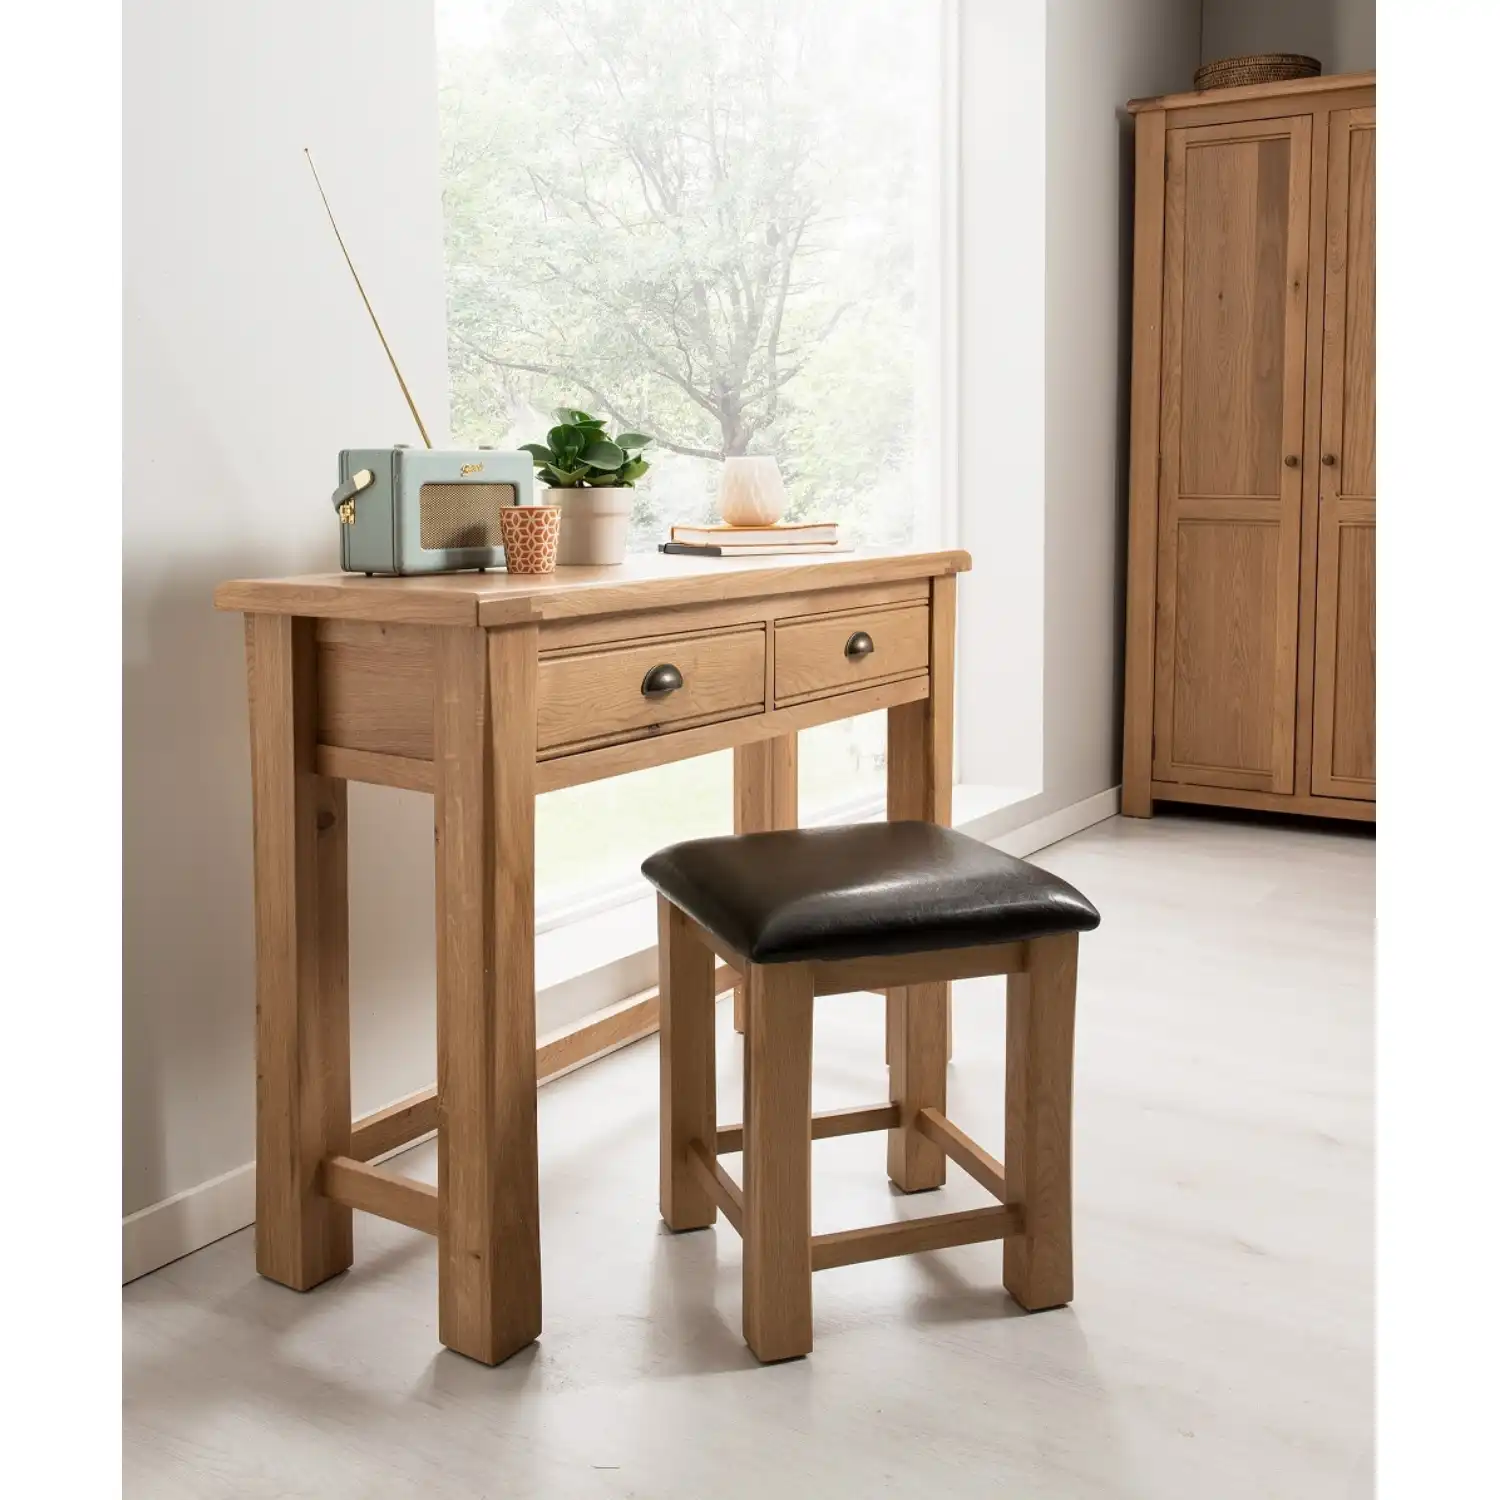 Solid Oak Dressing Table and Stool Set